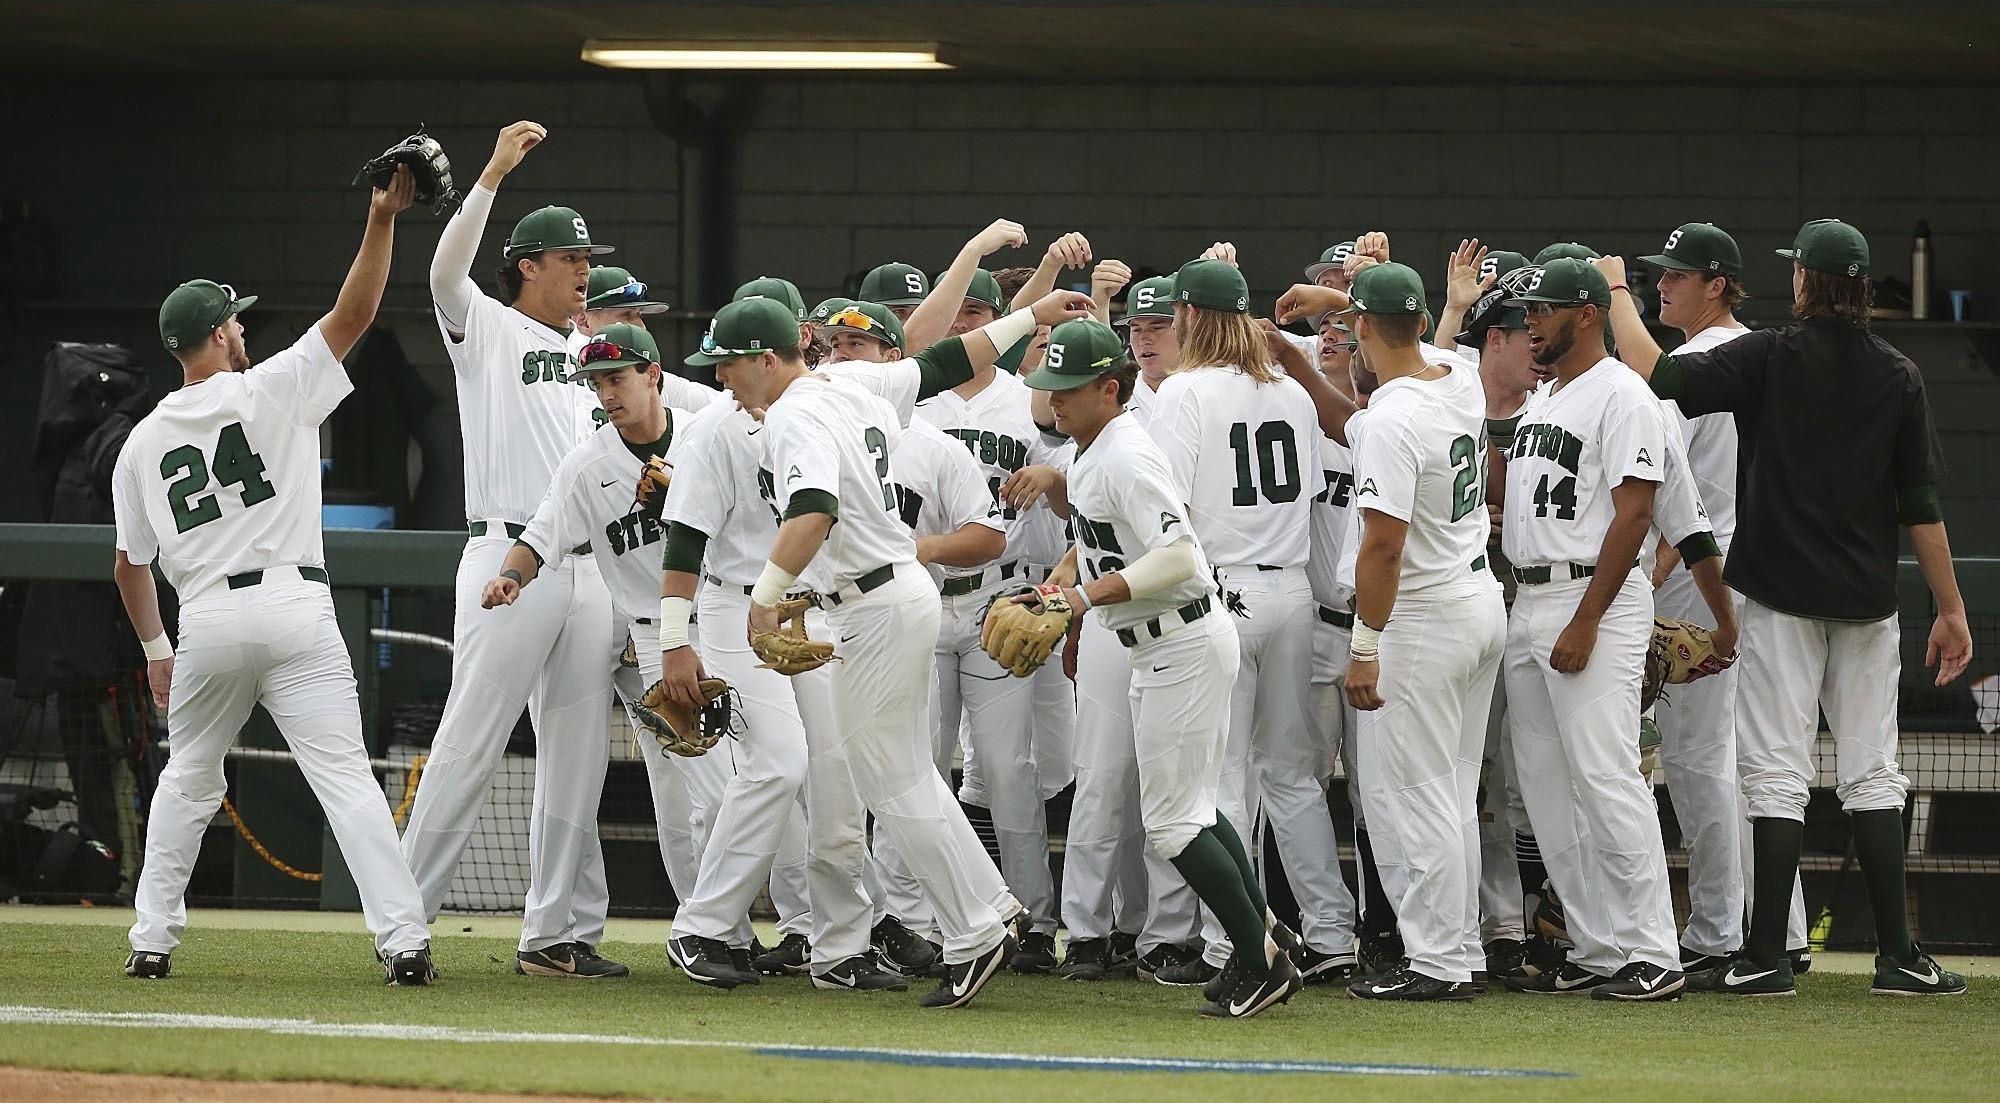 Stetson defeats Oklahoma State in NCAA’s DeLand Regional